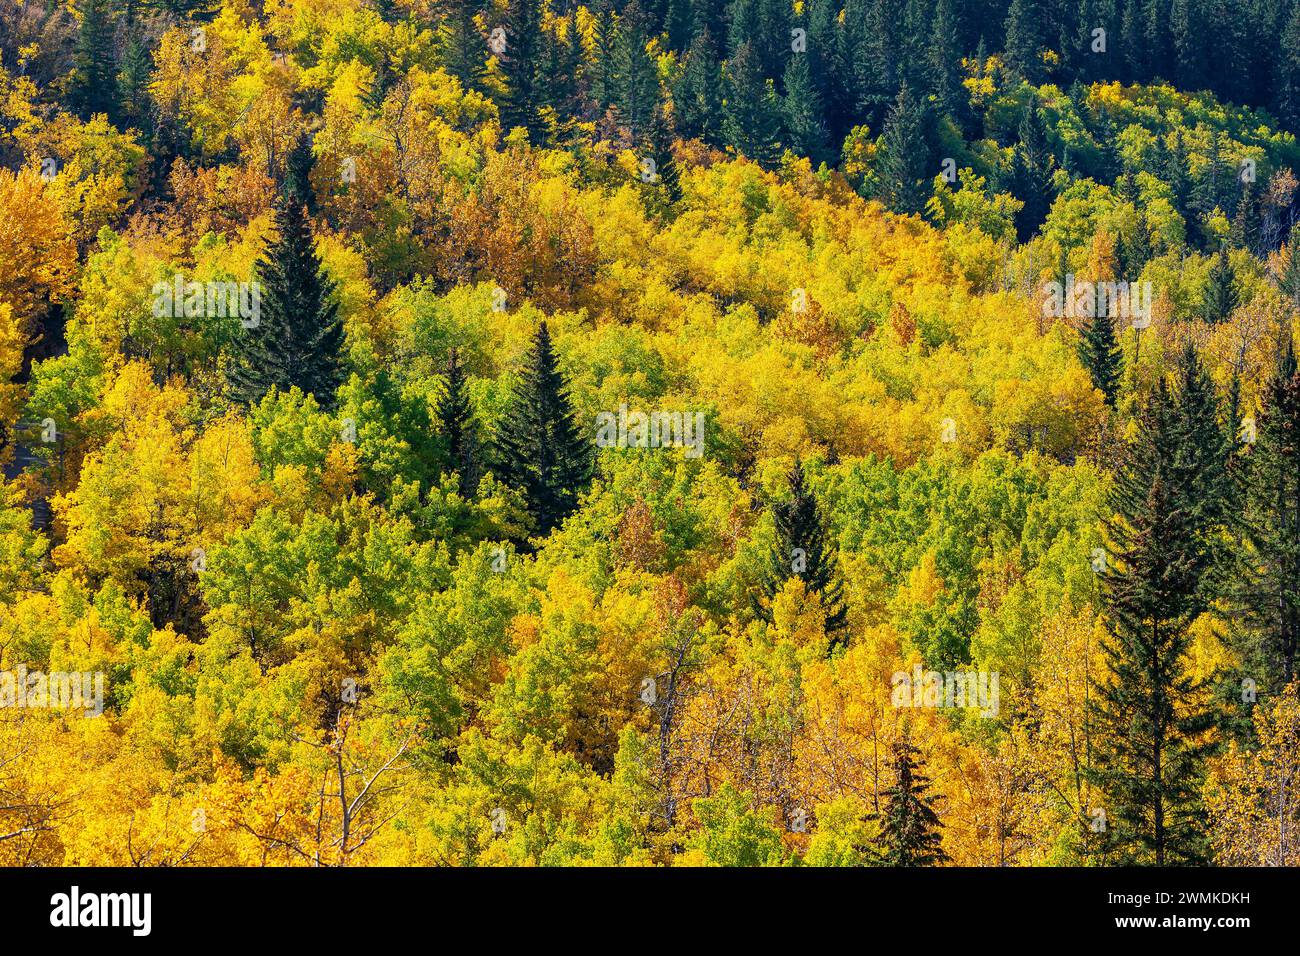 Colourful fall colours on a hill slope with some evergreen trees; Calgary, Alberta, Canada Stock Photo